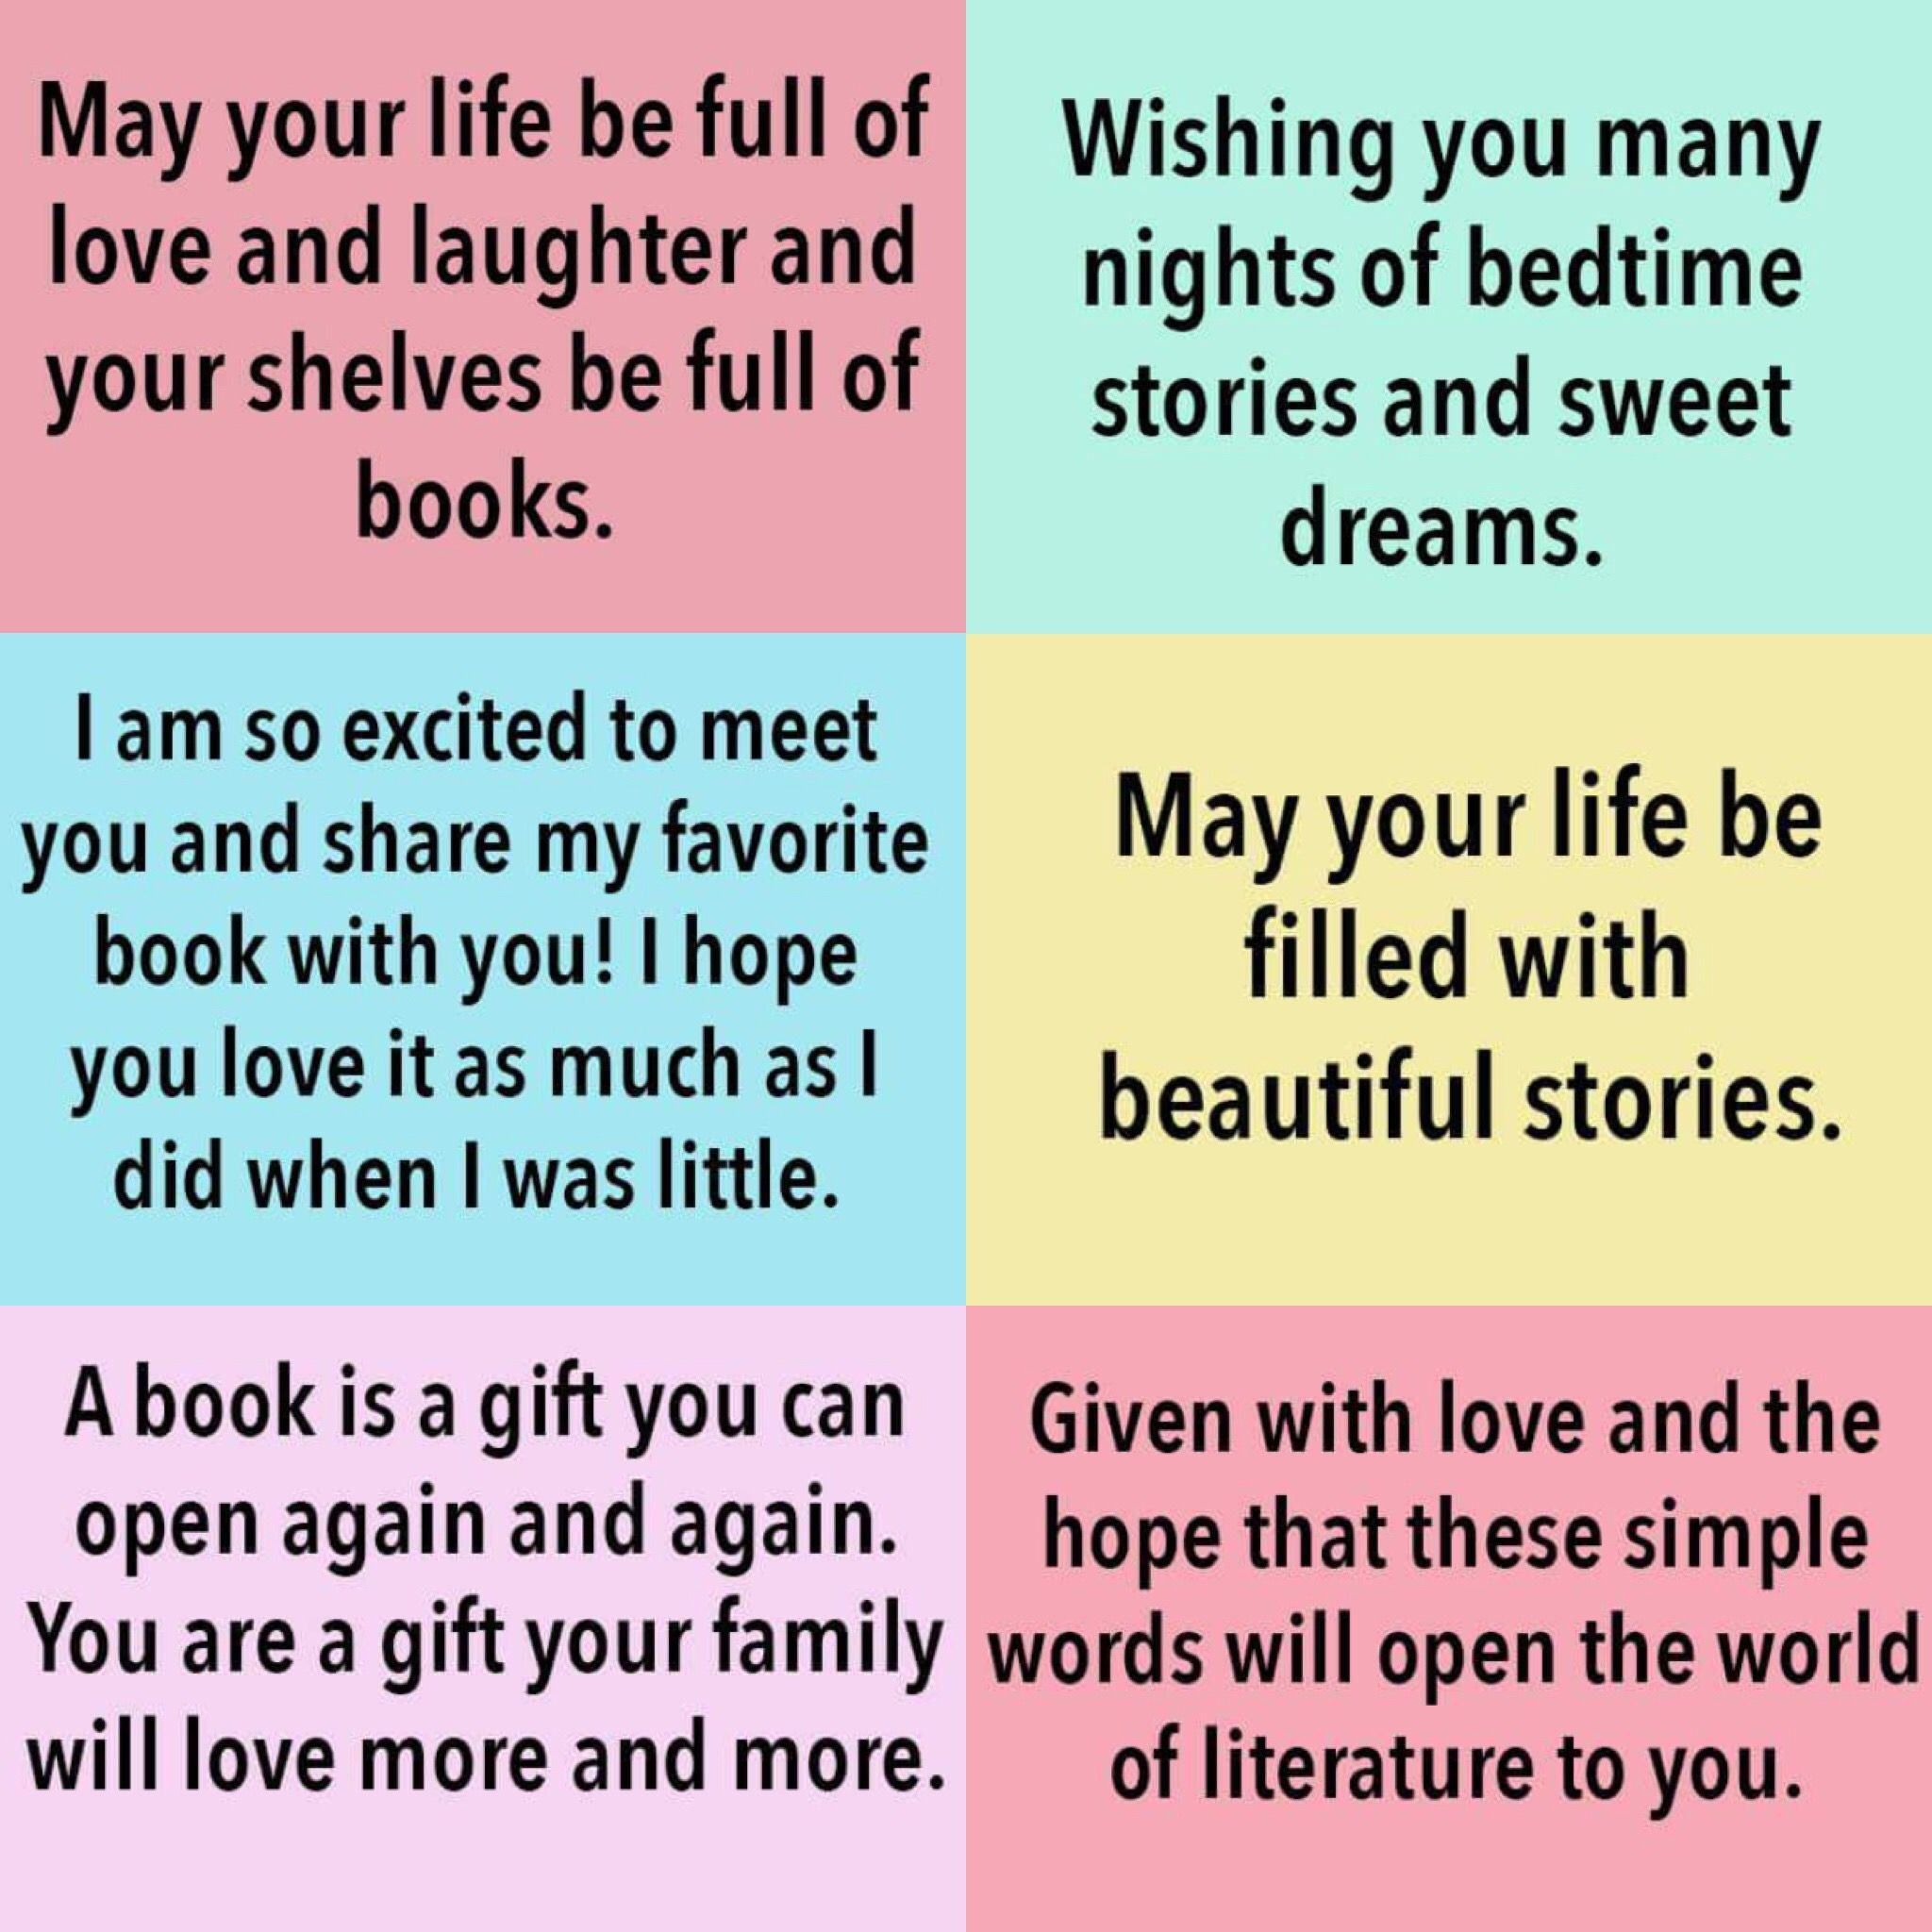 Quotes For Baby Shower Books
 Baby book inscription ideas in 2019